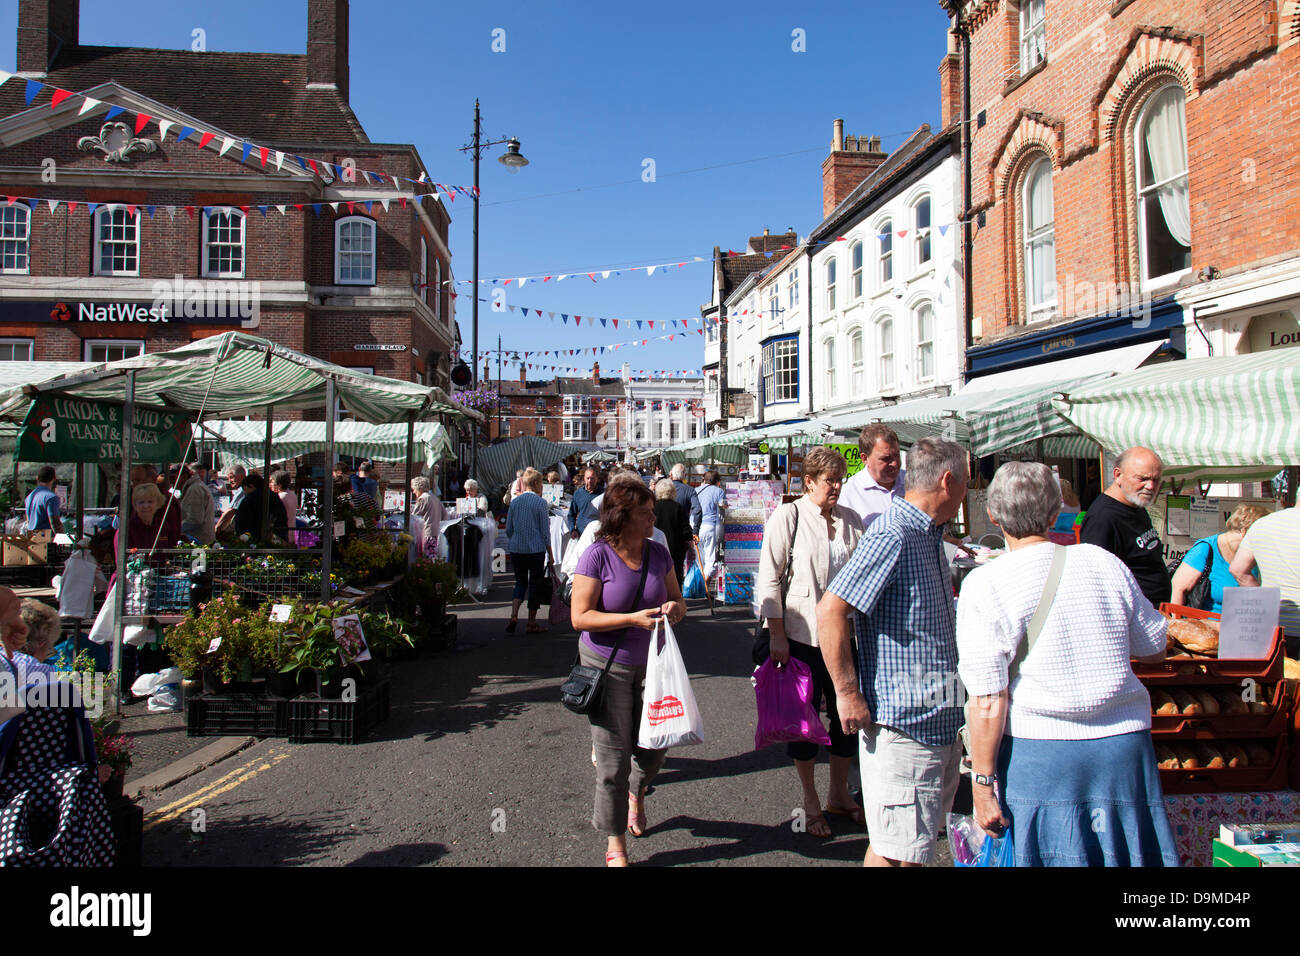 Marché de Louth, Louth, Lincolnshire, Angleterre, Royaume-Uni Banque D'Images